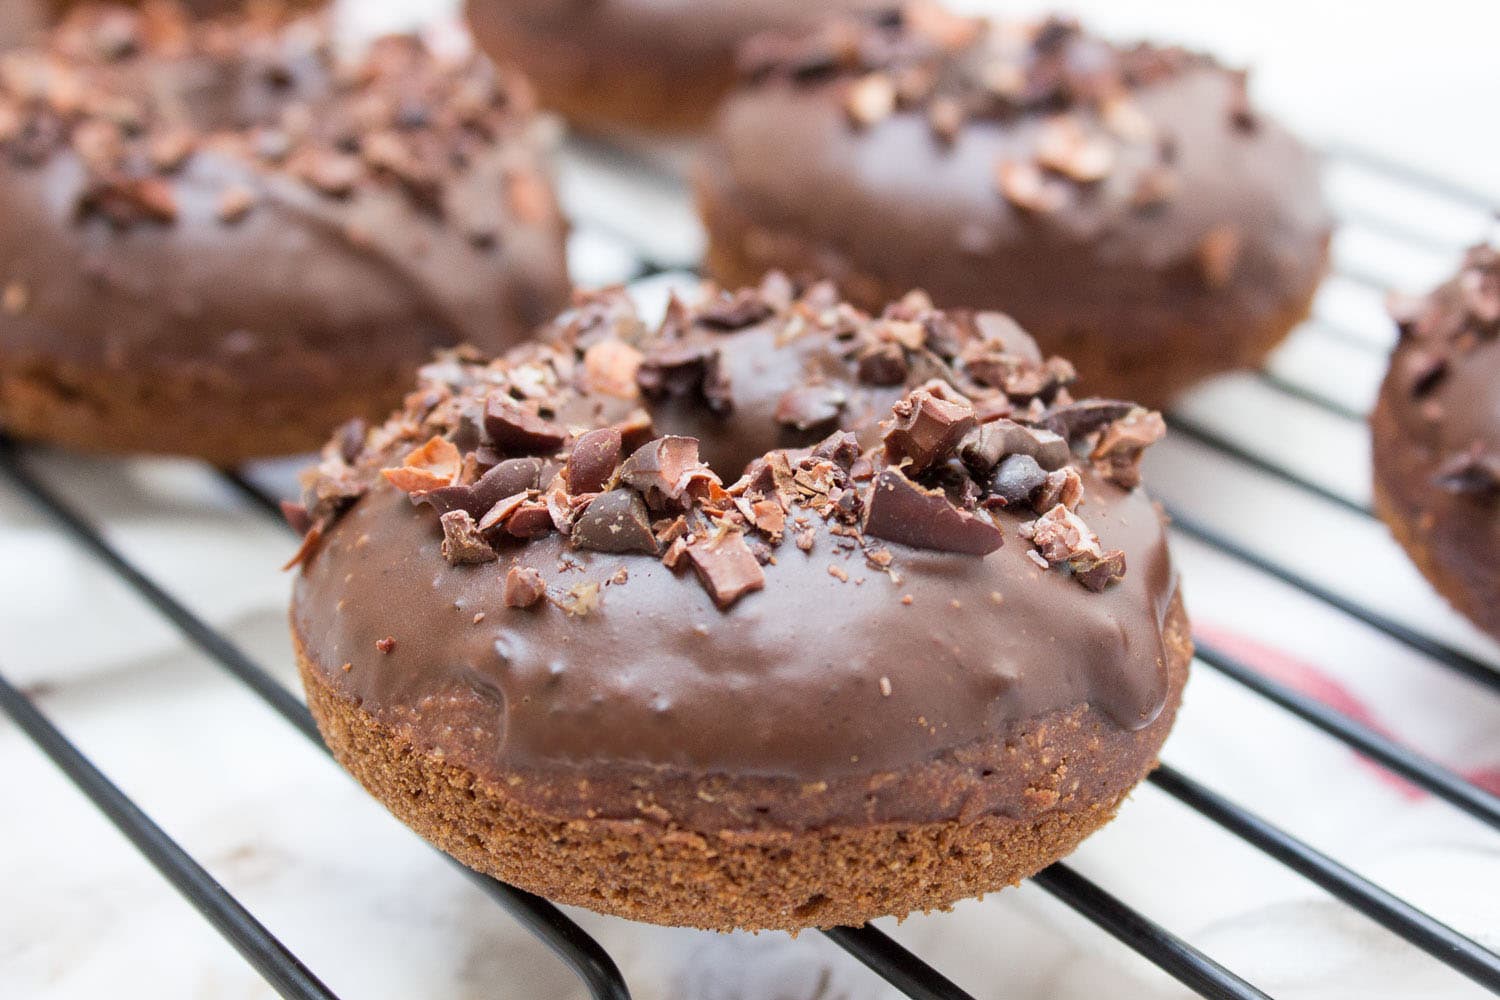 Baked whole wheat double chocolate banana donuts infused with cinnamon and topped with melted dark chocolate. These are made with all healthy ingredients, nutritious and contains no refined sugars! CLICK to read more or PIN for later! #donuts #doughnuts #healthy #easy